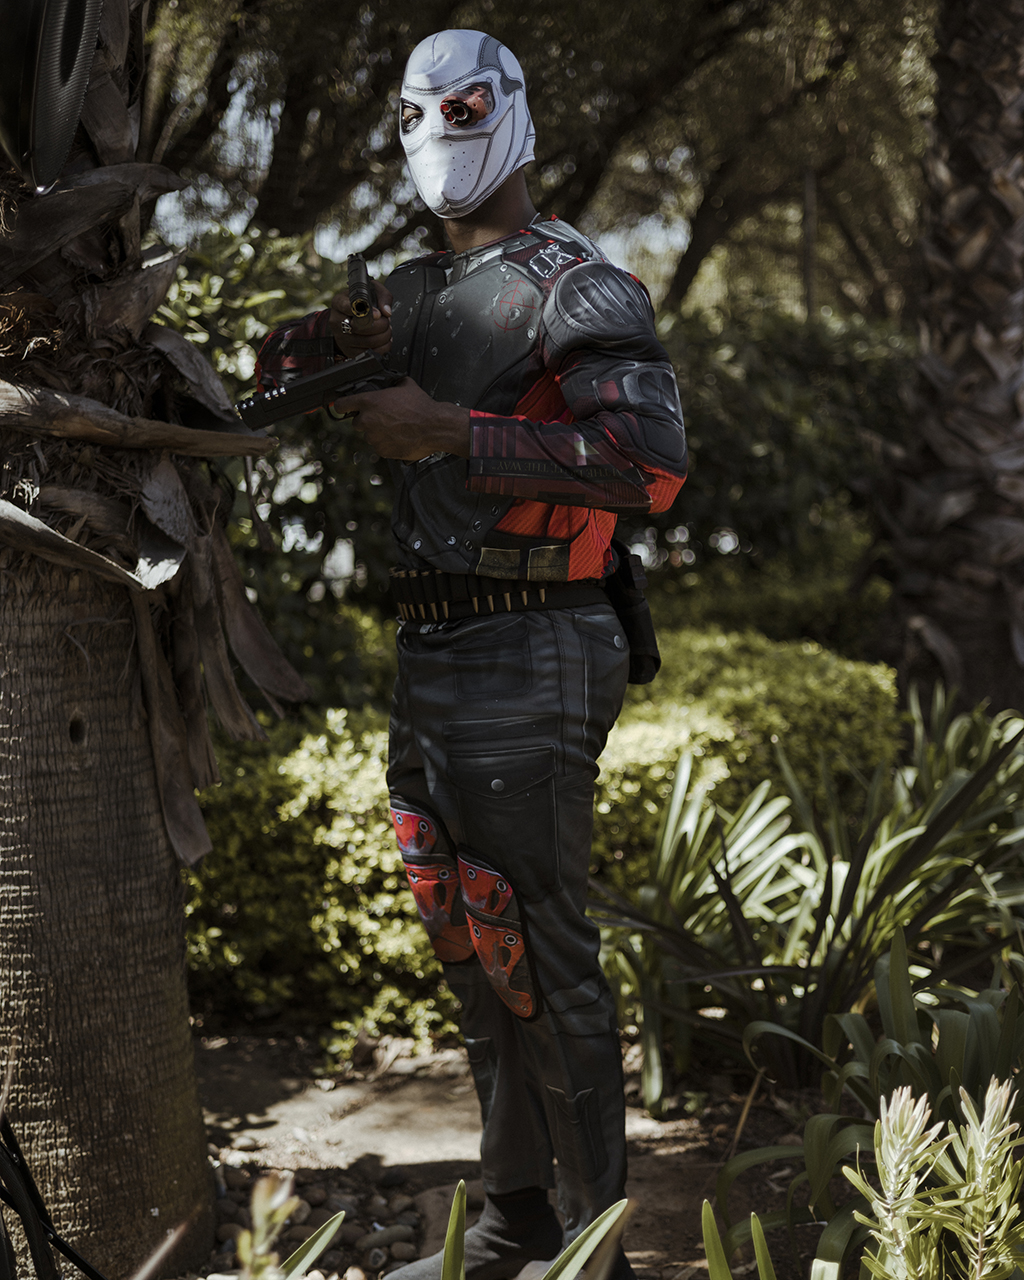 South African cosplayer Deddy Watezwa, 23, poses for a portrait while dressed as the supervillain Deadshot.